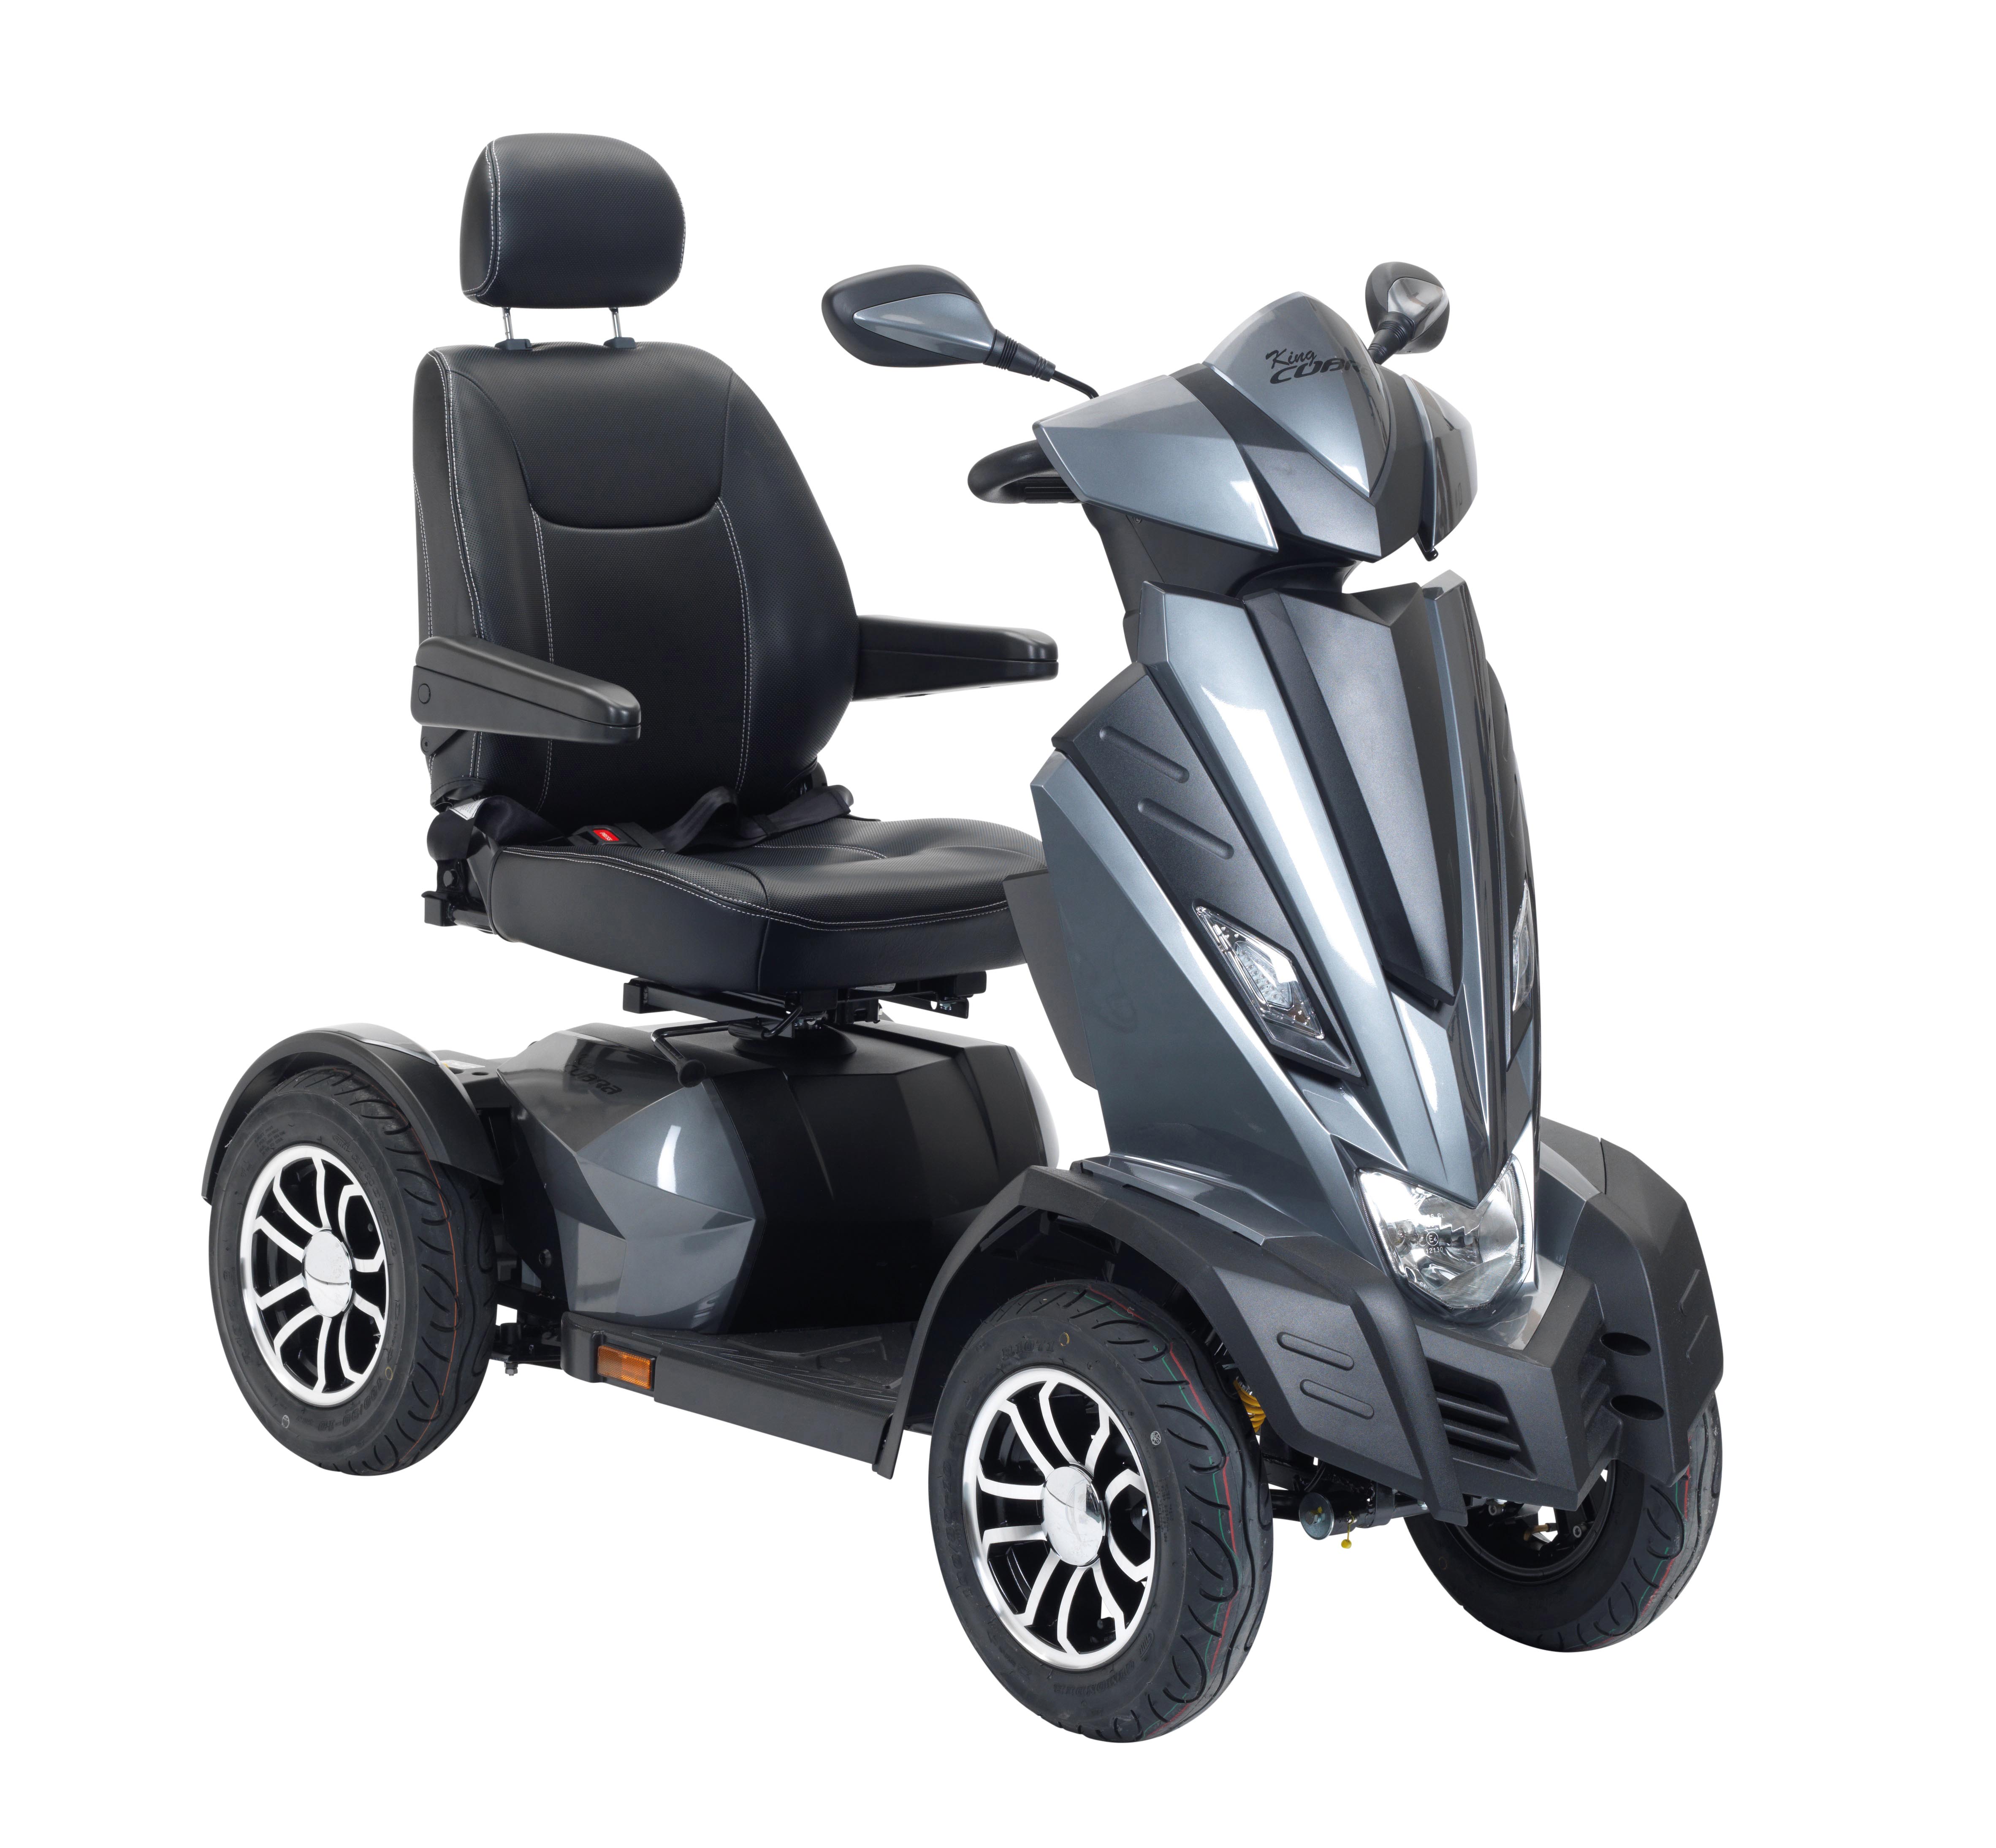 Picture of King Cobra Scooter - Graphite Grey